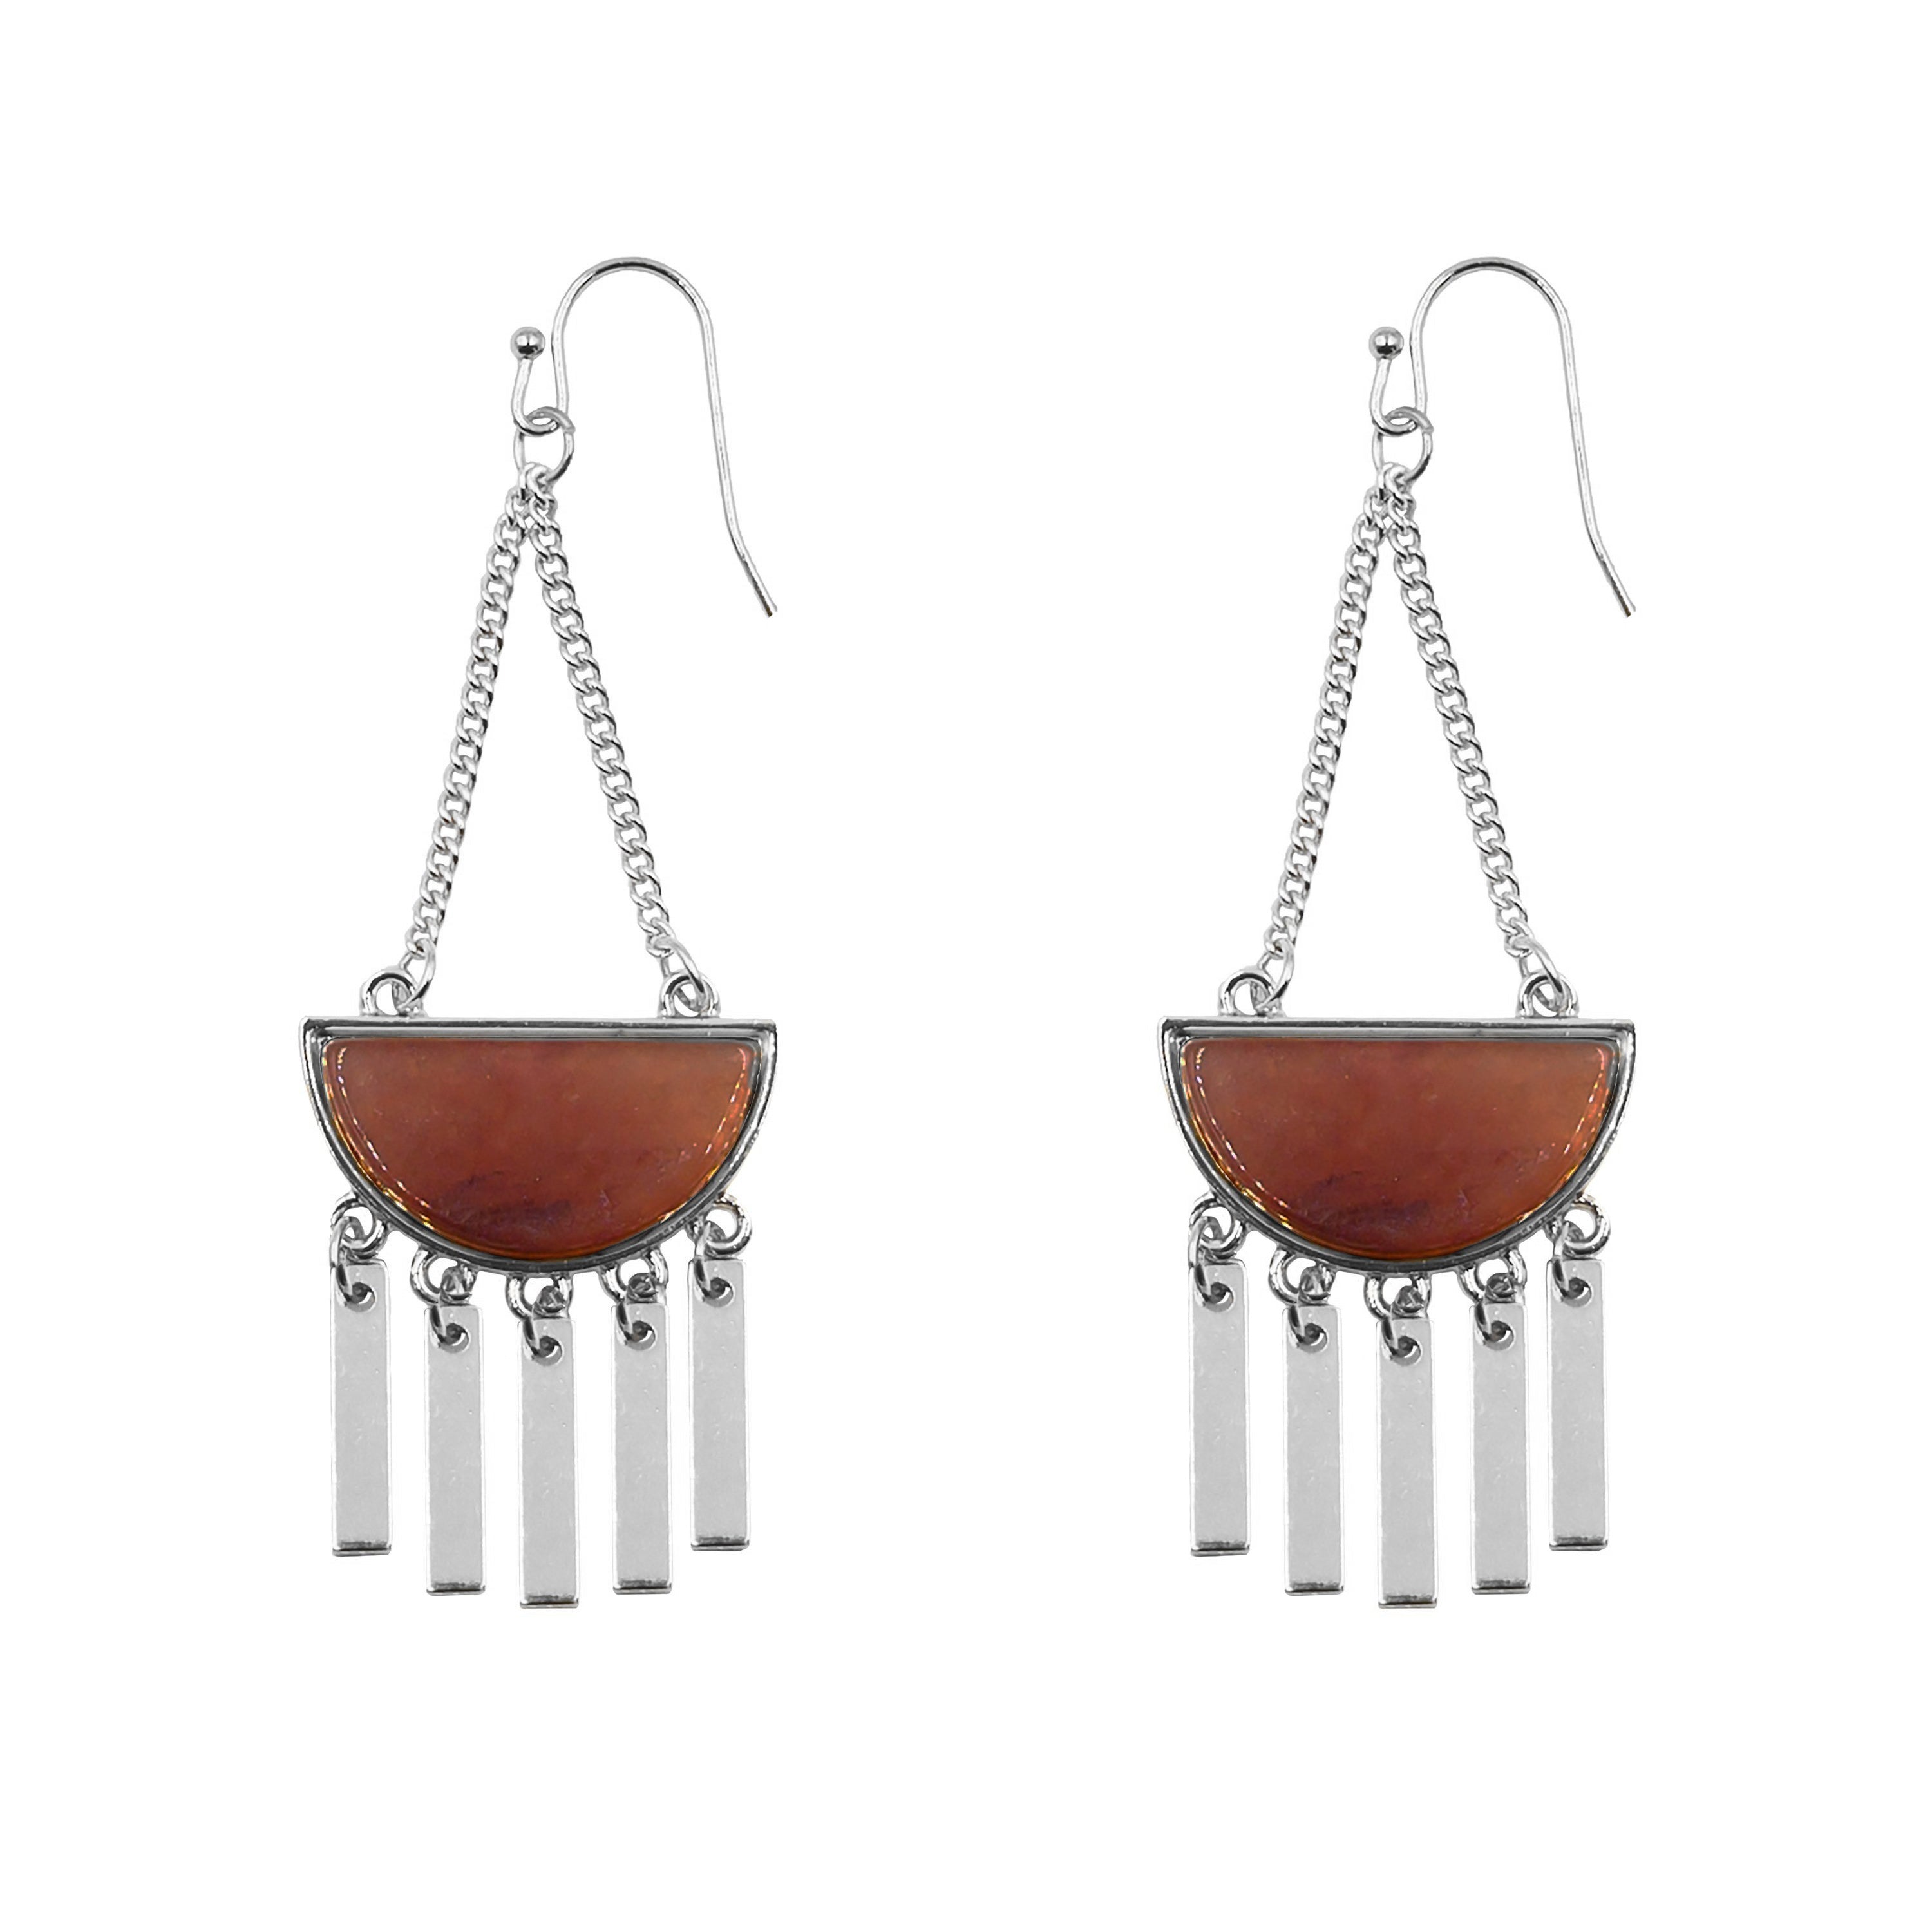 Bianca Collection - Silver Aragonite Earrings (Limited Edition) fine designer jewelry for men and women